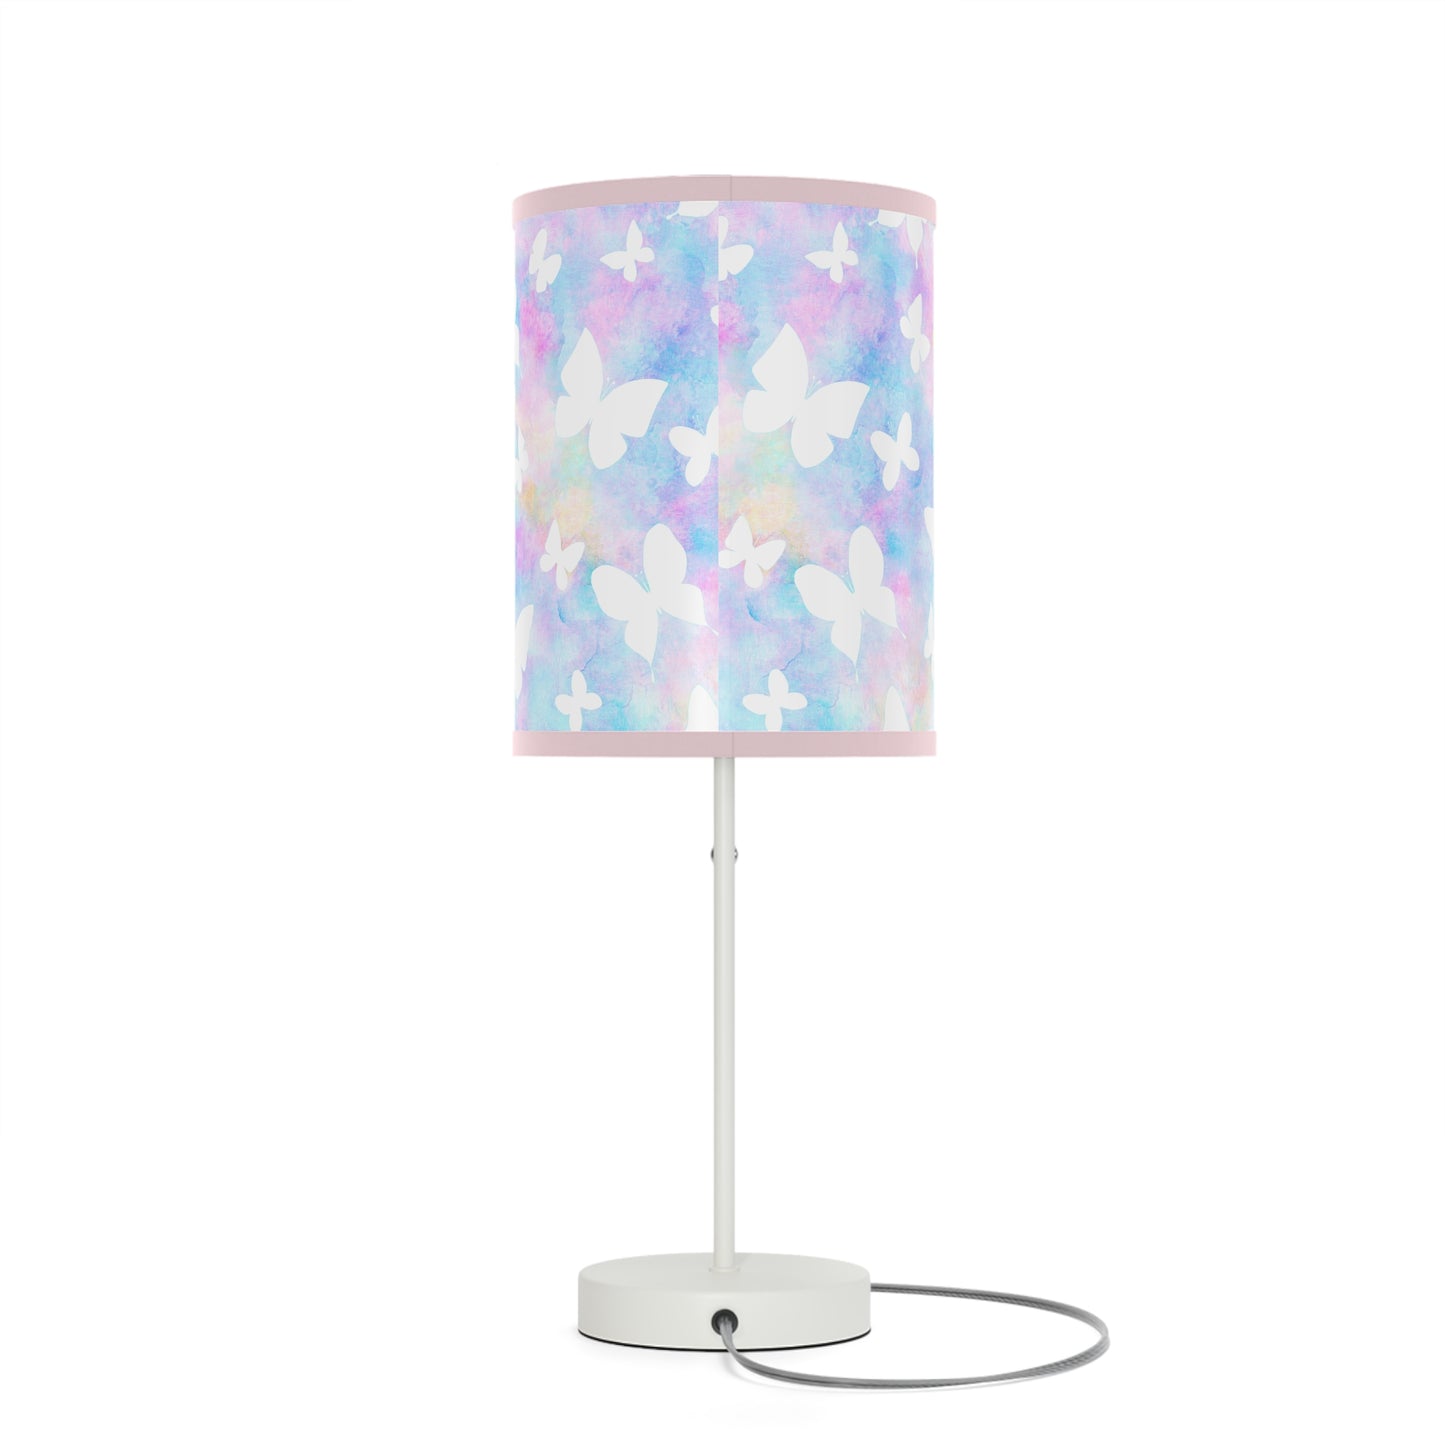 Pastel Butterflies Lamp on a Stand, US|CA plug, Steel Lamp Base with Silver or White Classy Finish, Choose Your Color Trim